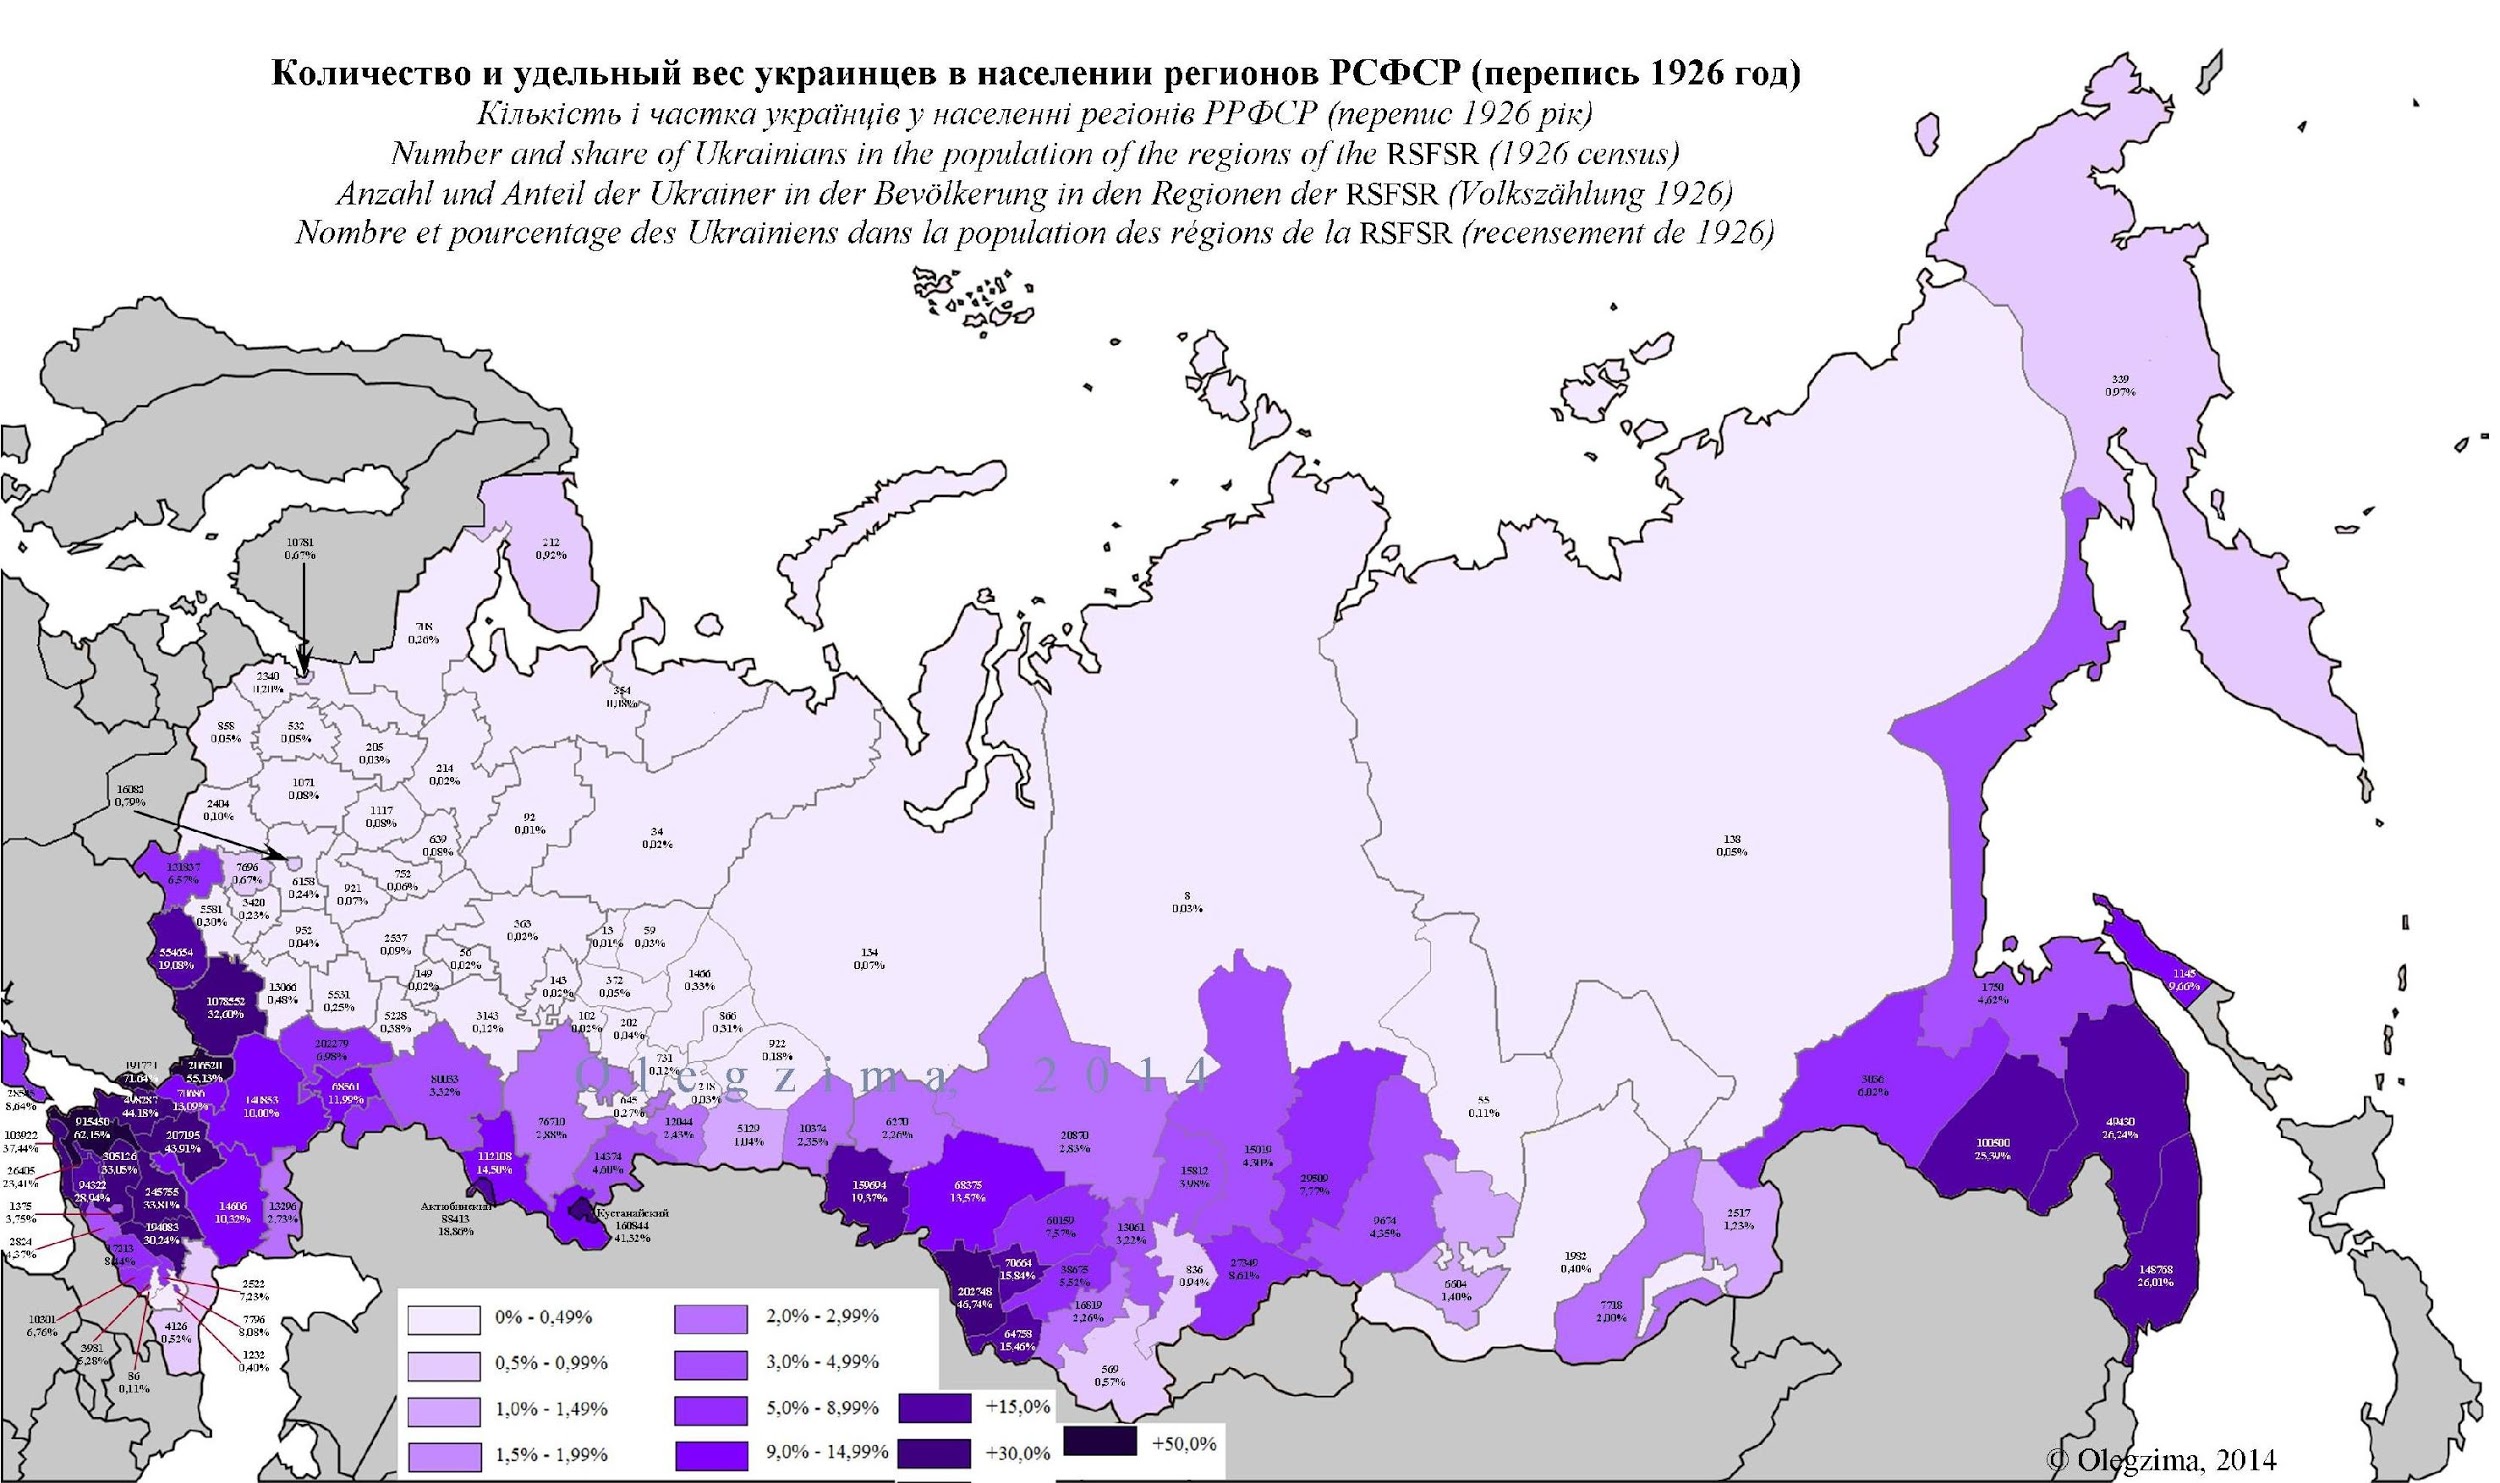 Number and share of Ukrainians in the population of the regions of the RSFSR, 1926 census. Graph by Olegzima, Wikimedia Commons. ~